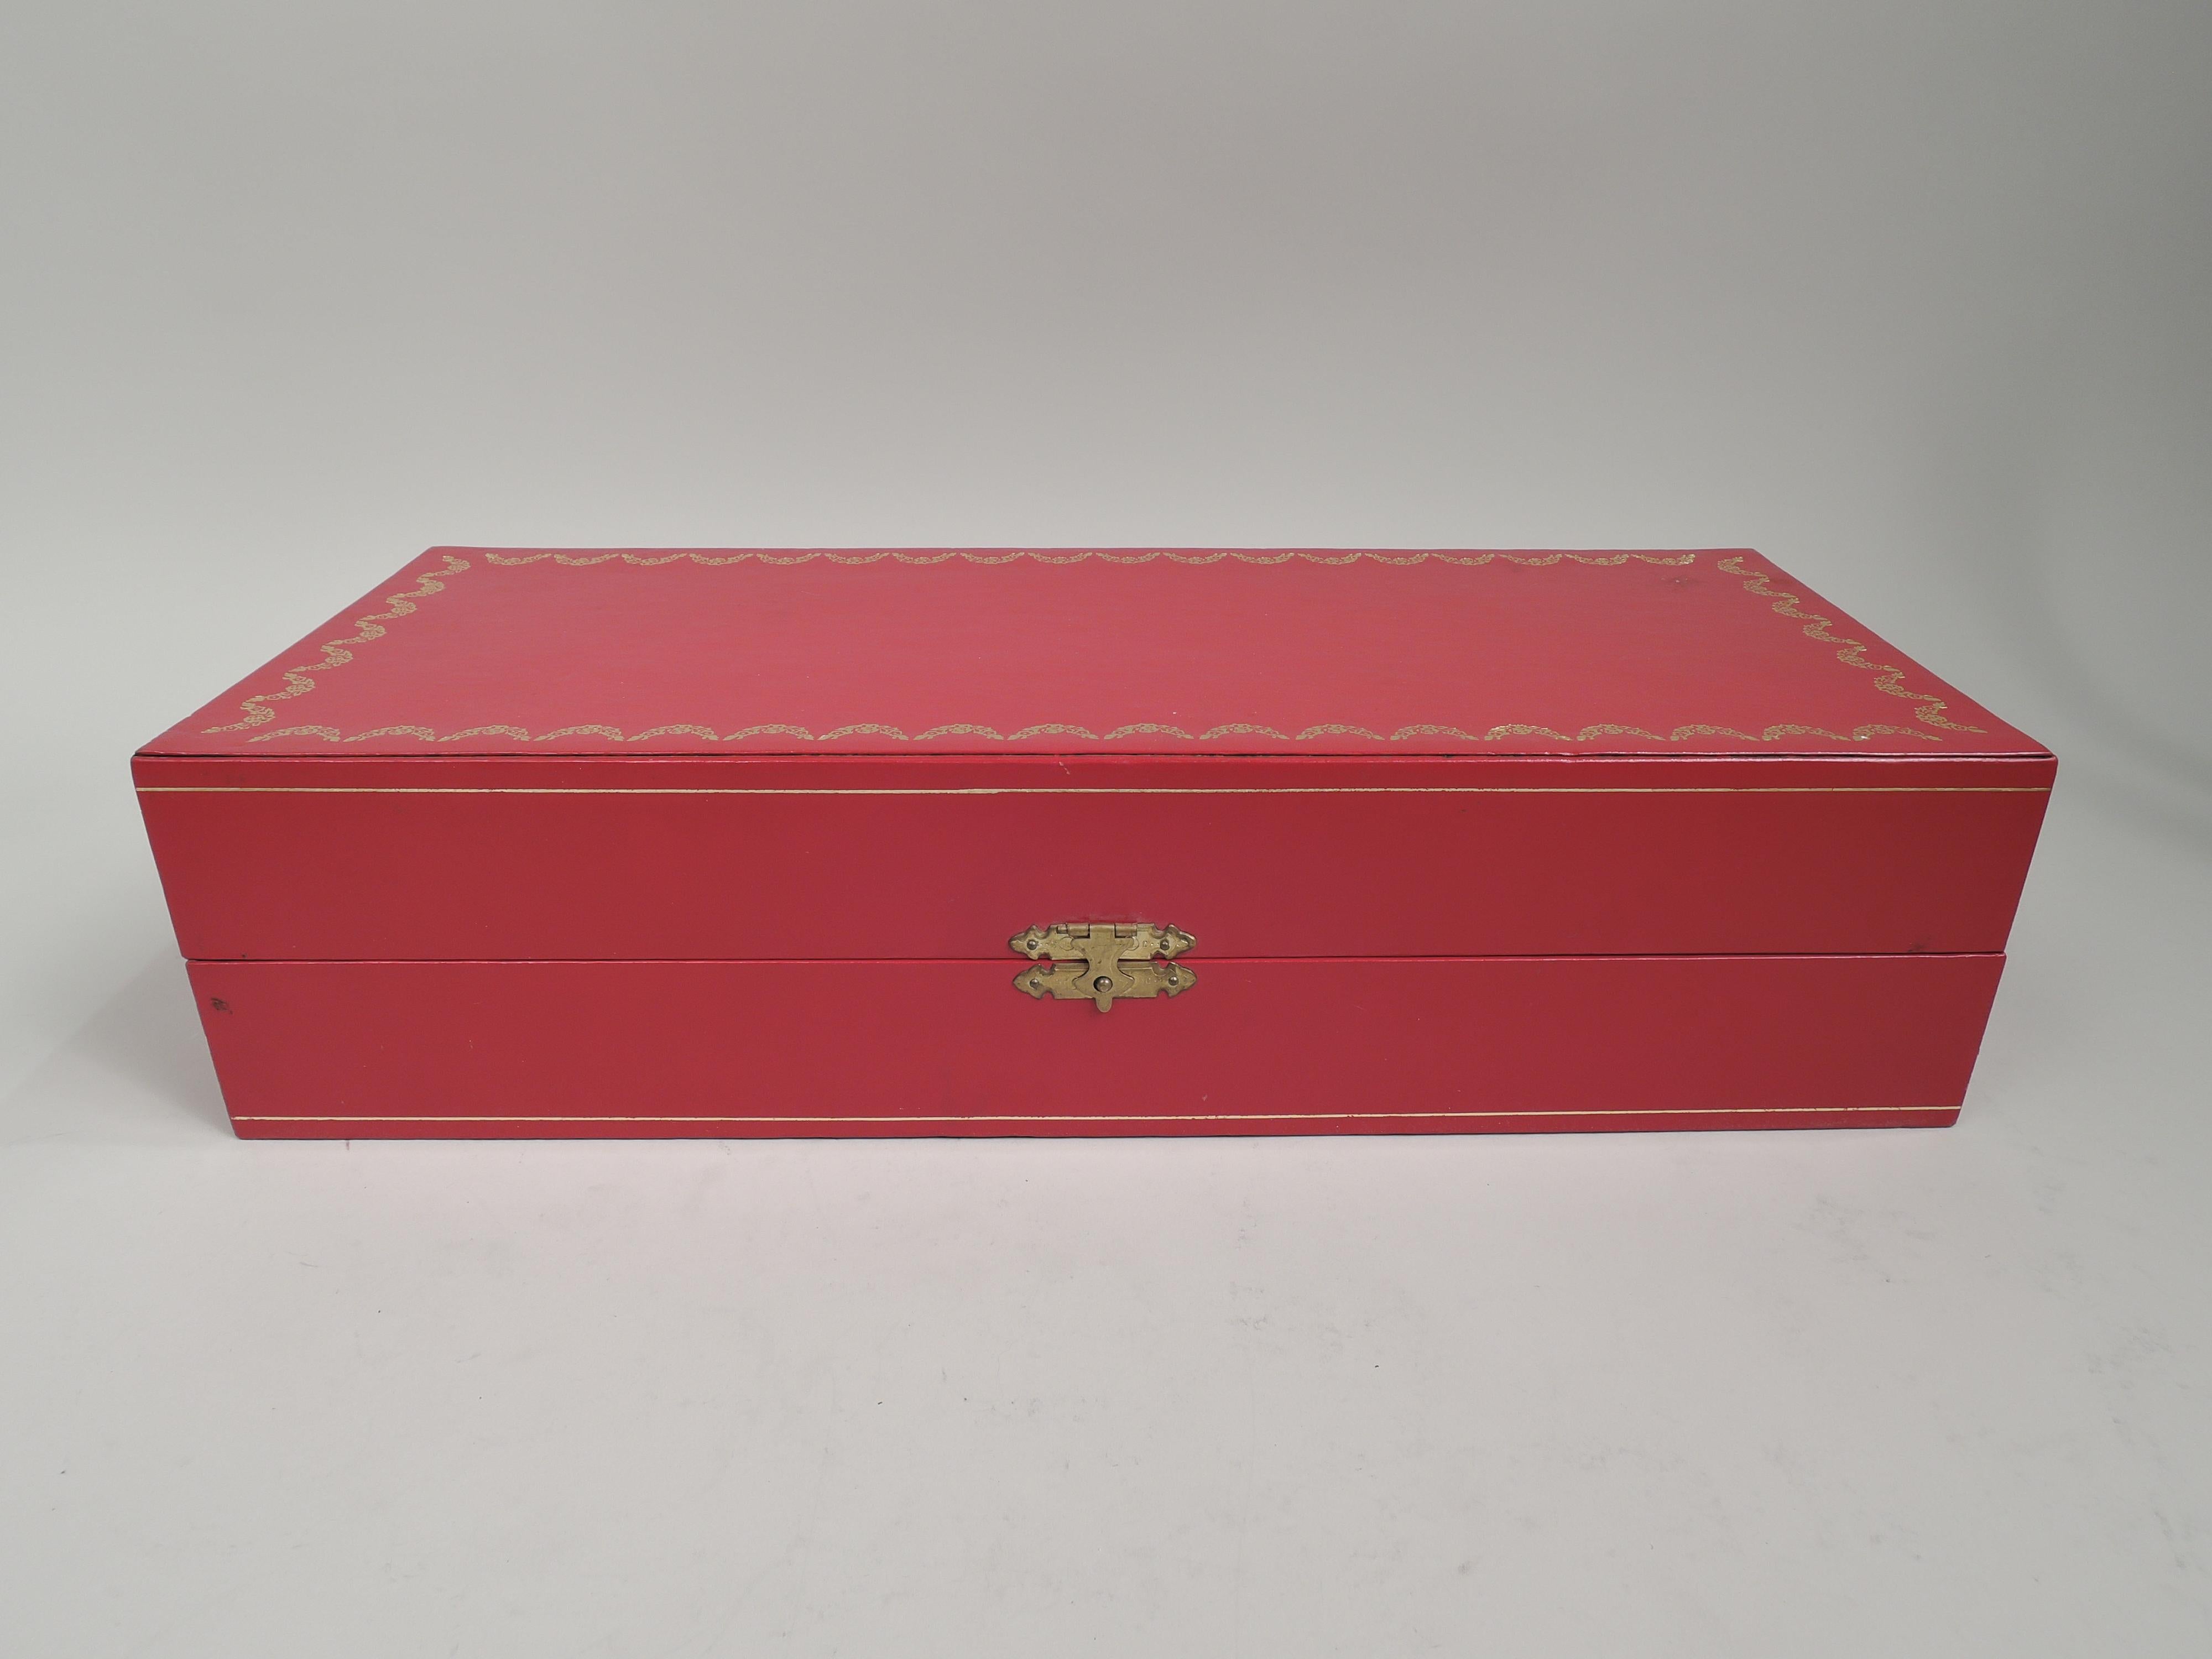 Set of 4 Cartier Sterling Silver Mint Juleps in Leather-Bound Case 1